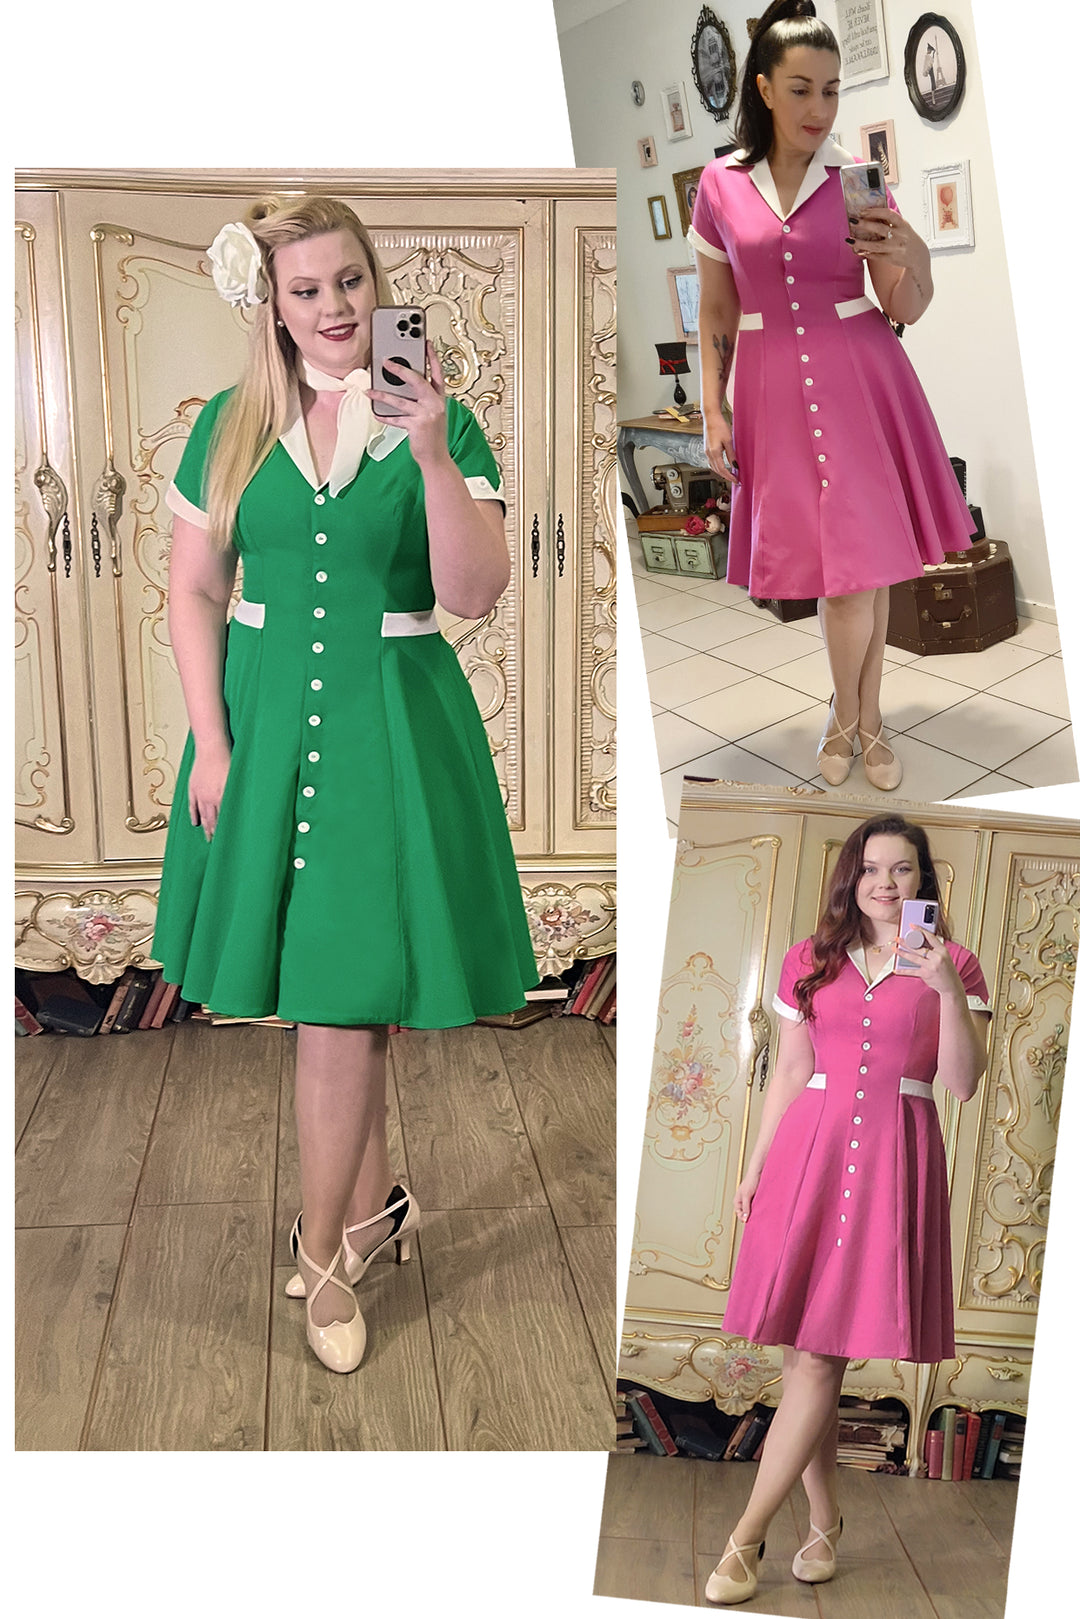 'D'Amour Diner Dress' - Size Guide